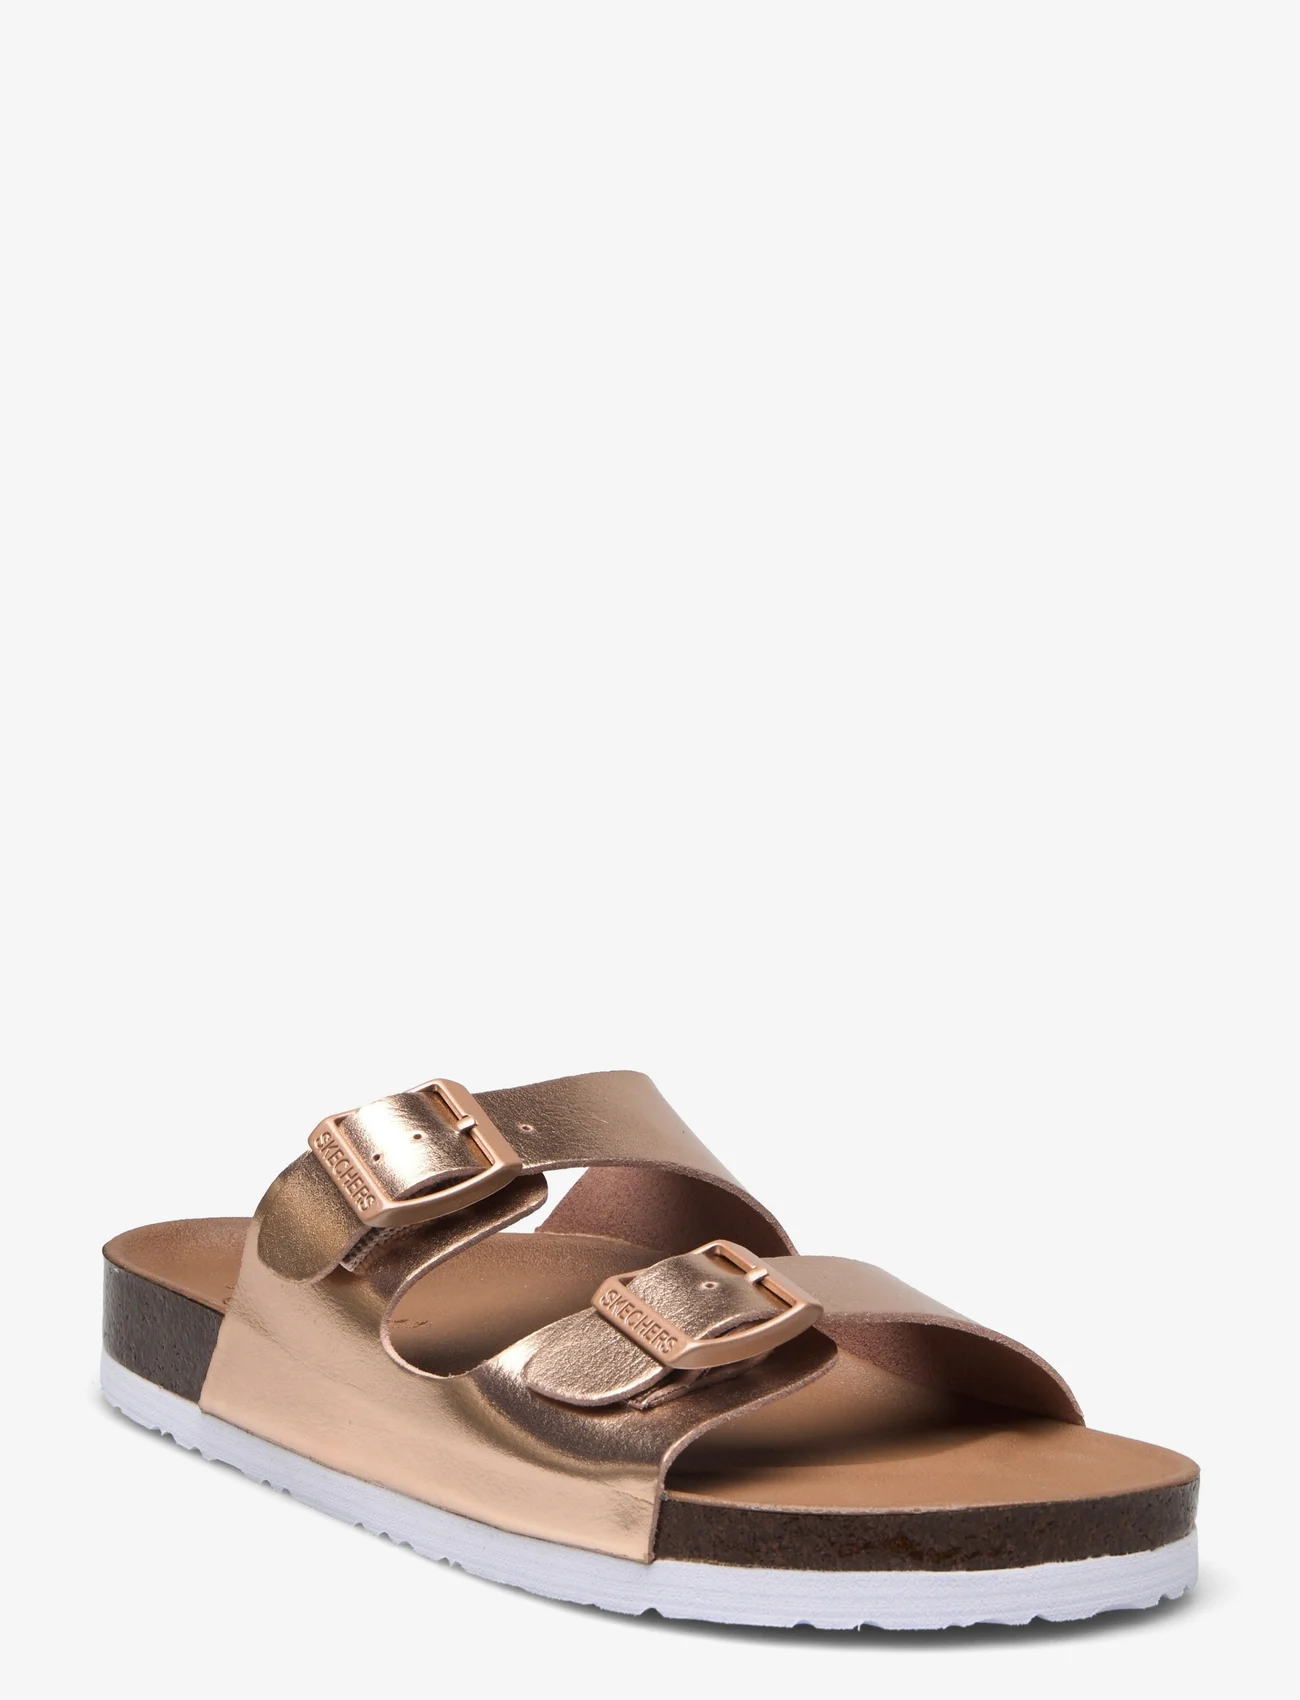 Skechers - Womens Relaxed Fit: Granola - Bloom Farm - matalat sandaalit - rsgd rose gold - 0